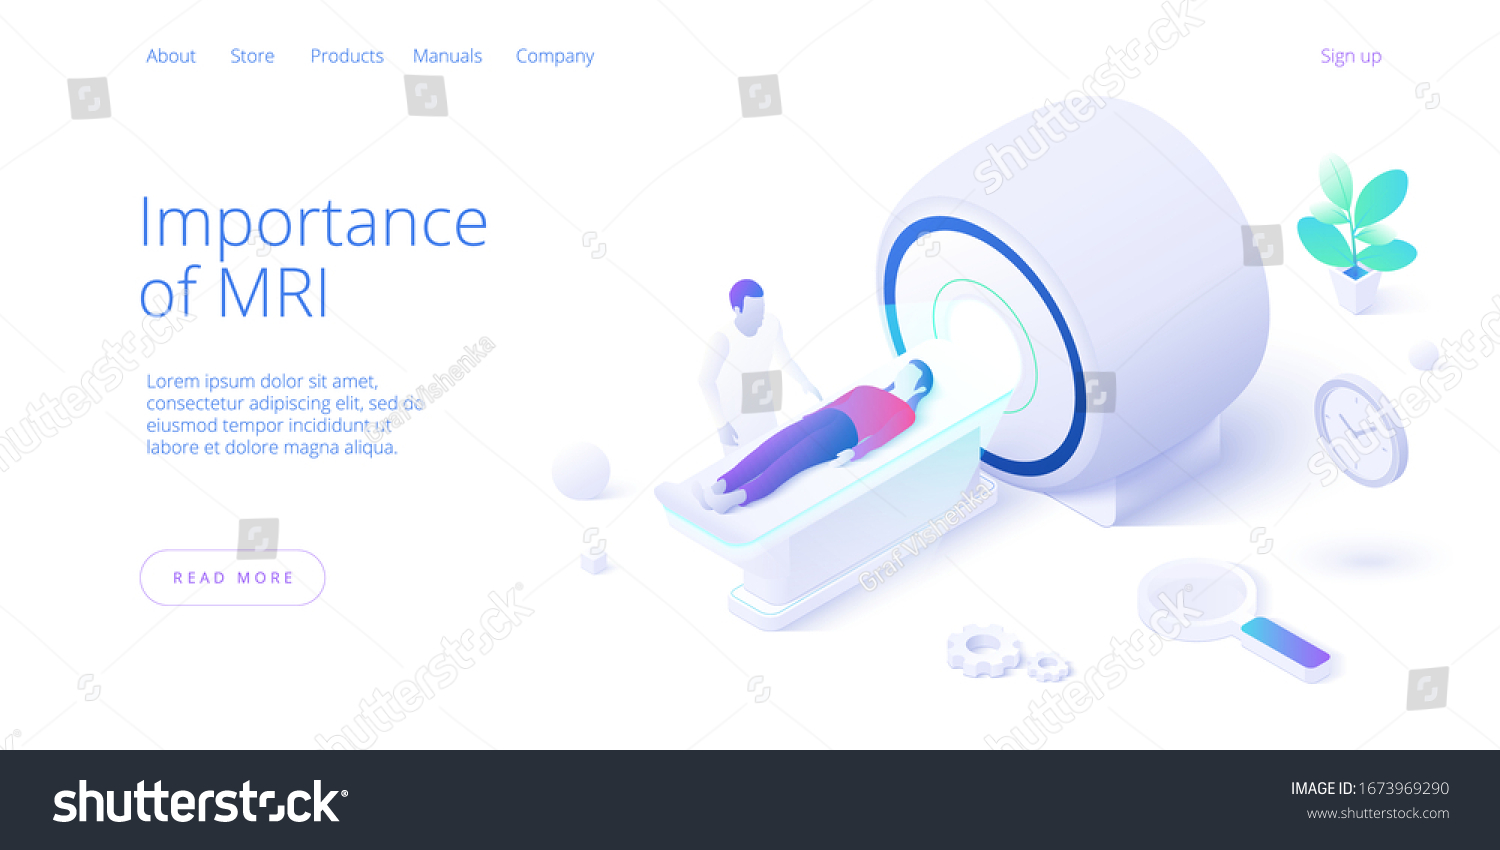 SVG of Magnetic resonance imaging concept in isometric vector design. Male doctor doing diagnostics of female patient with mri scan machine or equipment. Web banner layout template. svg